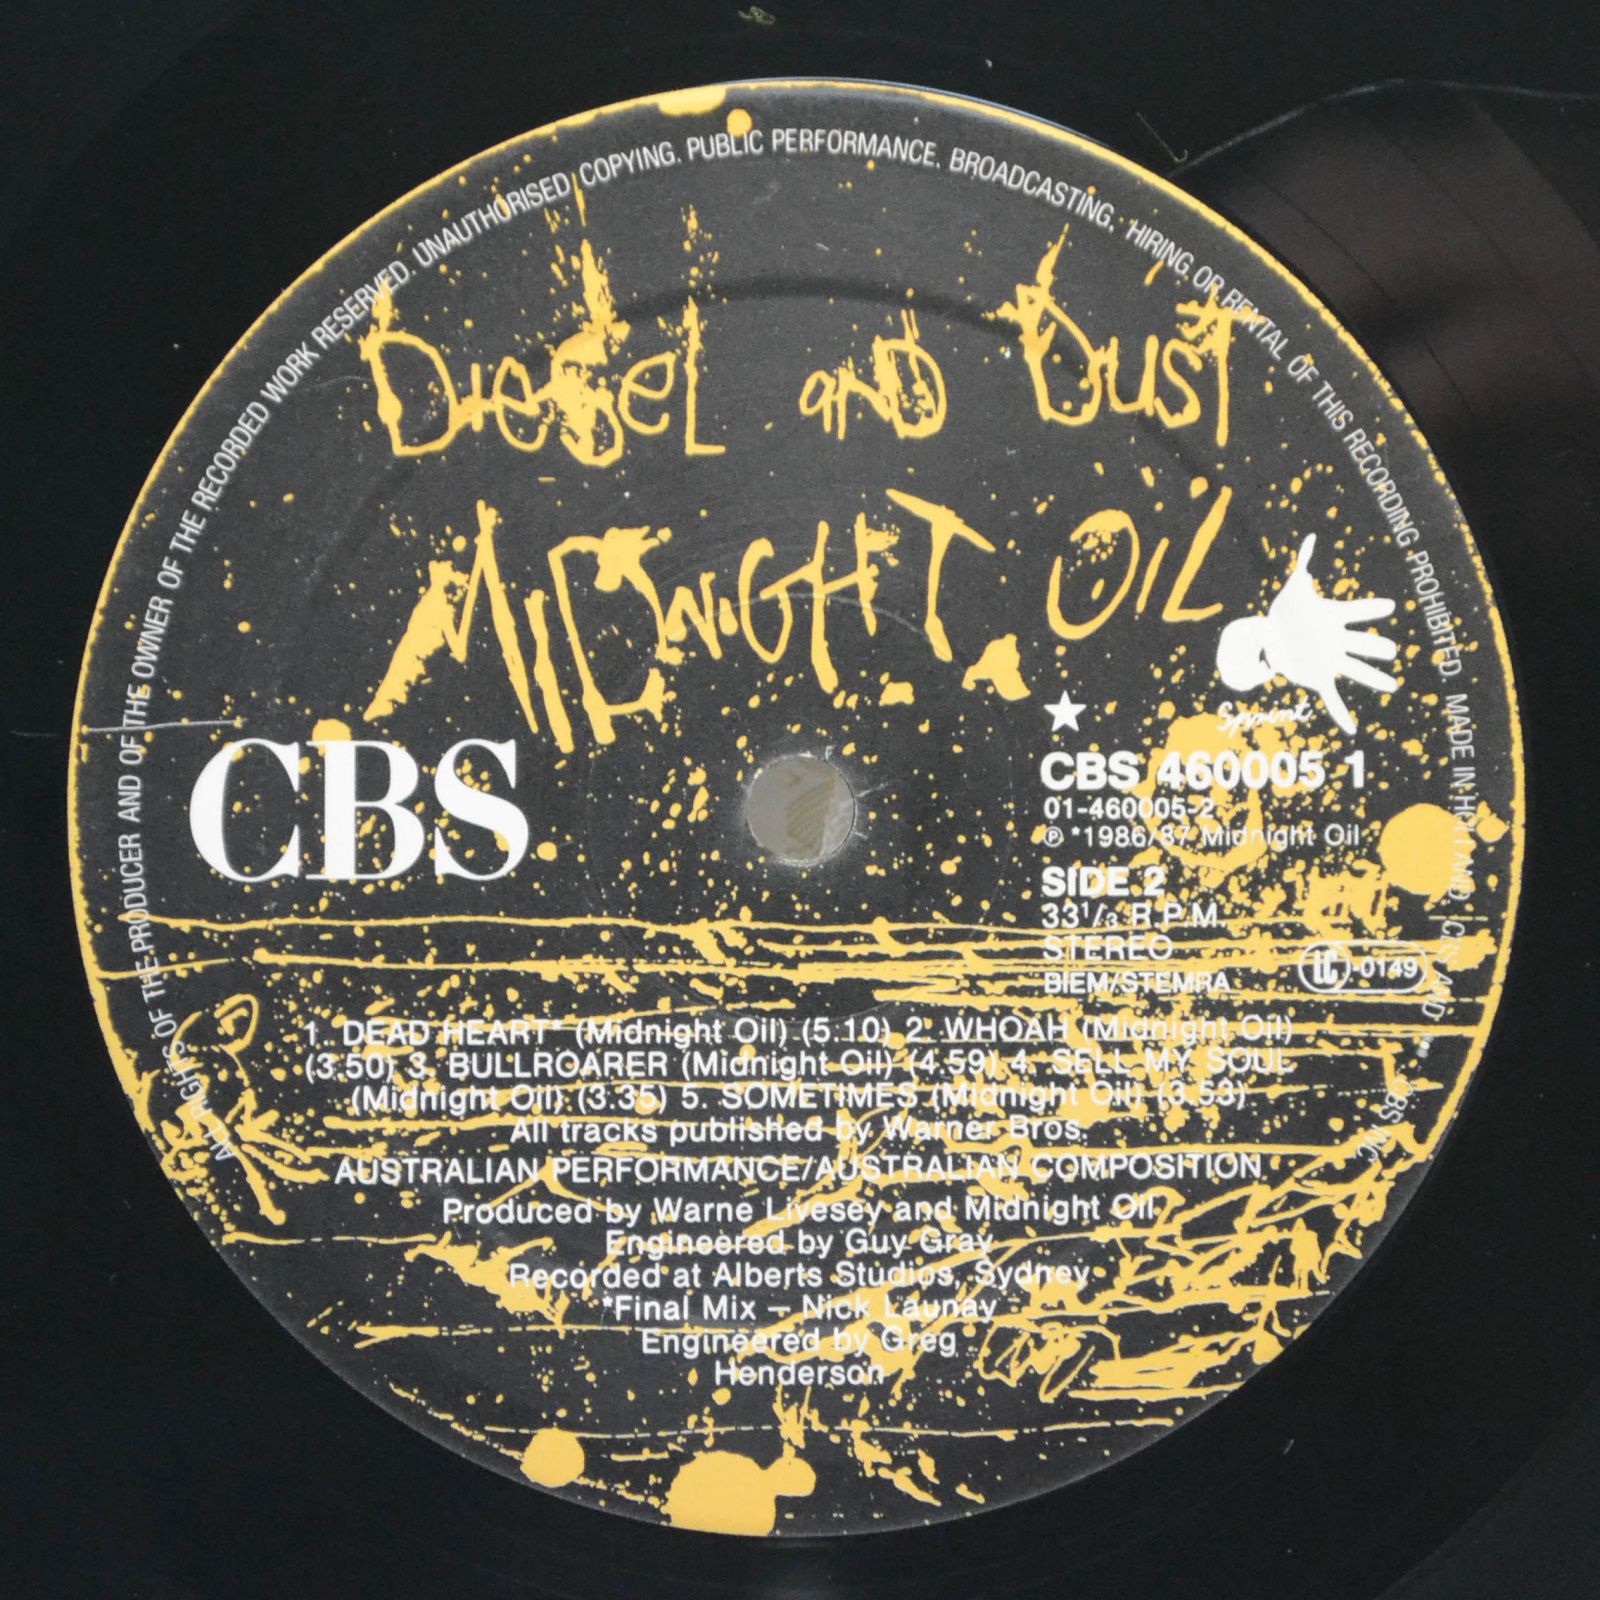 Midnight Oil — Diesel And Dust, 1987